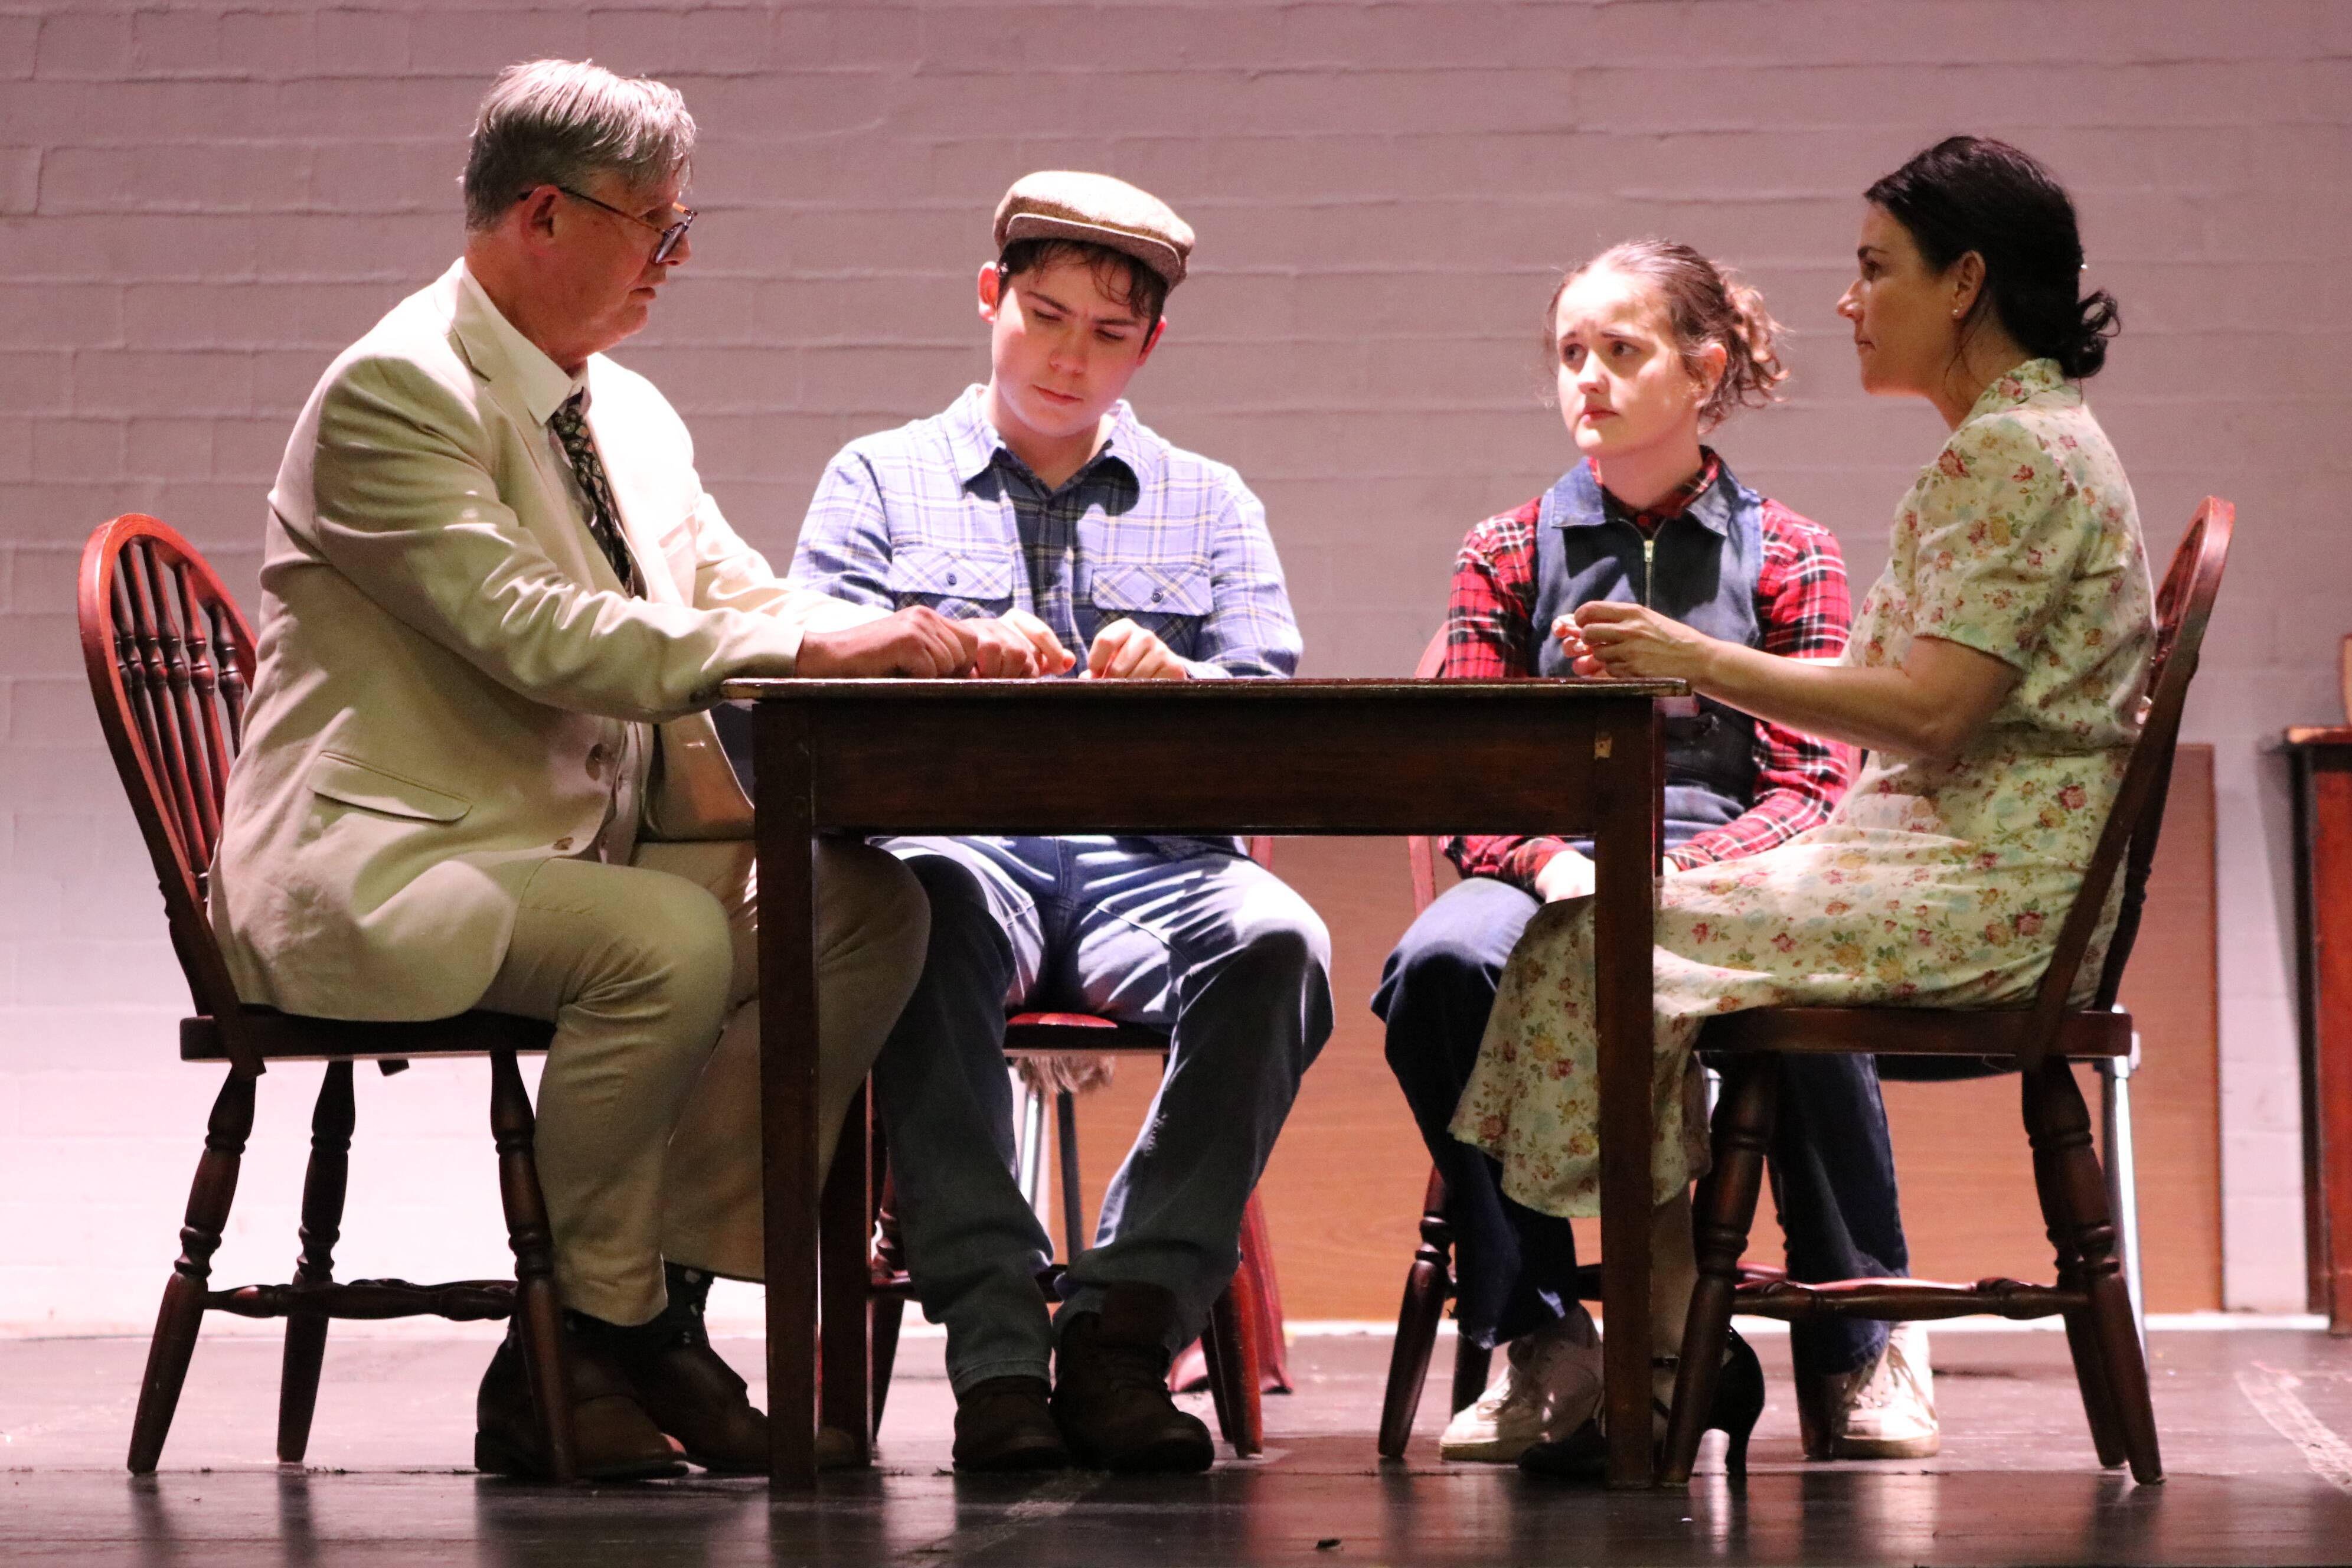 How Harper Lee's 'To Kill a Mockingbird' transformed from page to stage